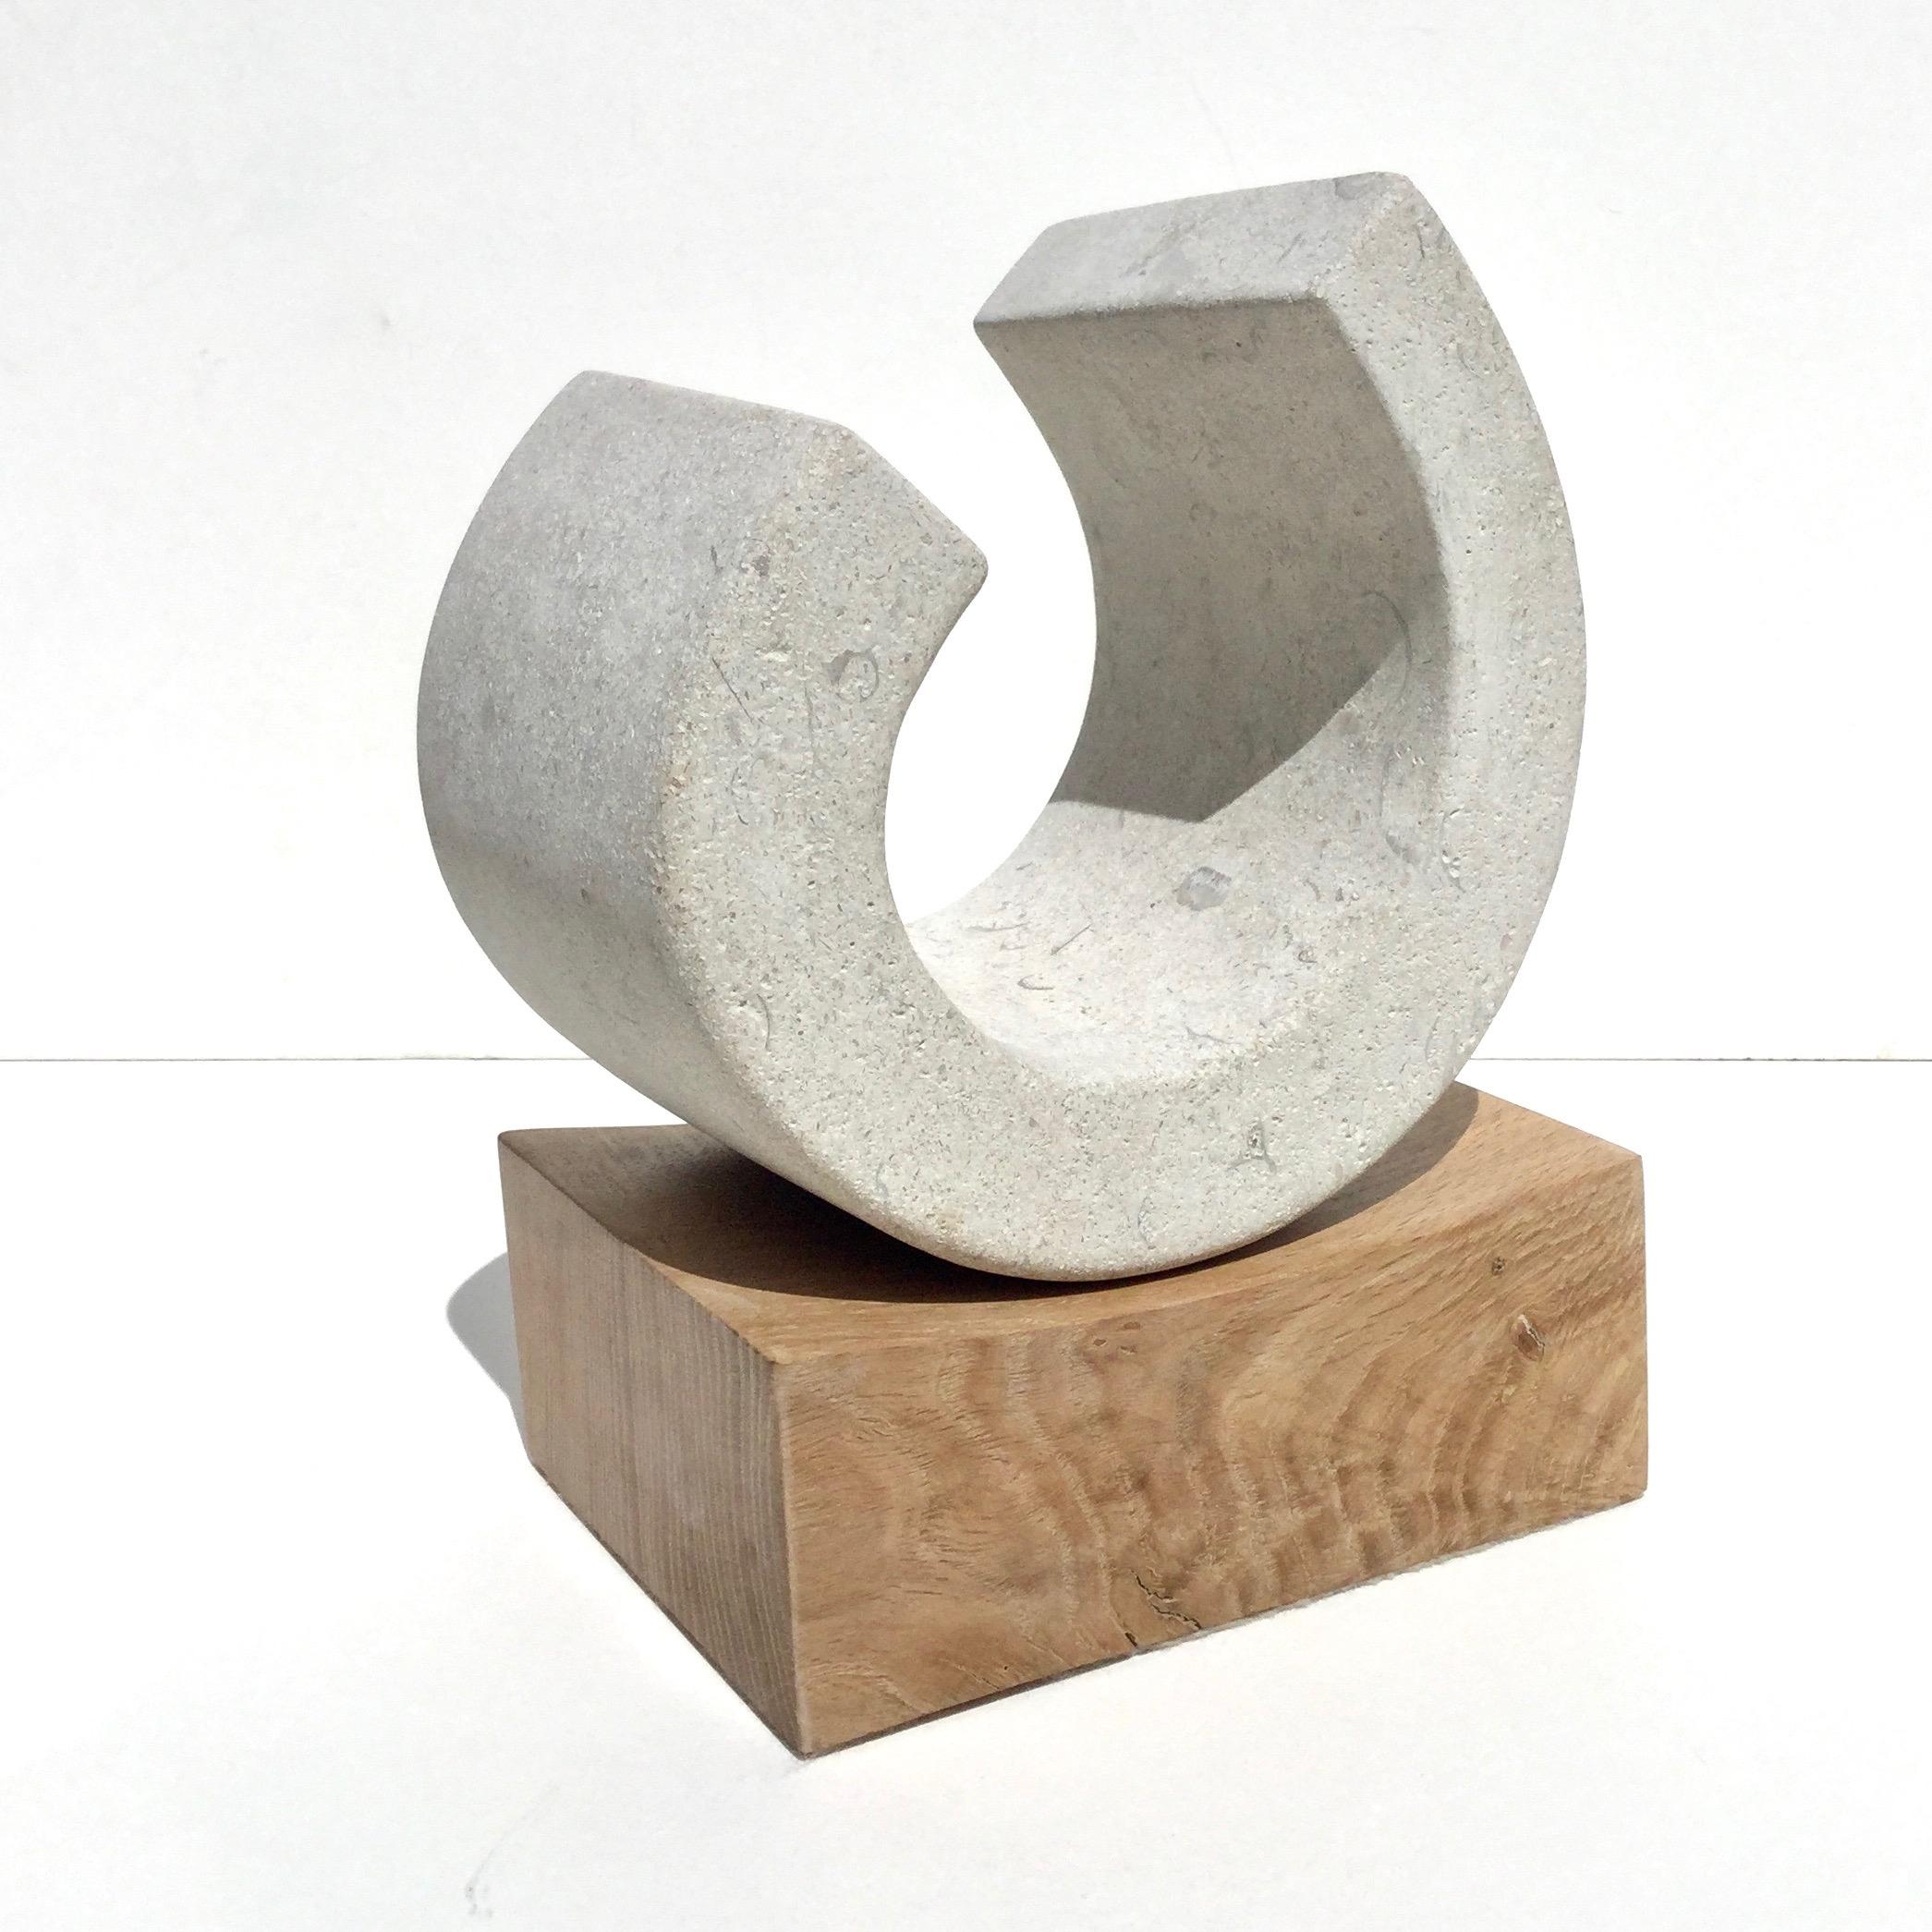 You III, Richard Fox. Small abstract stone sculpture on oak plinth, carved 1